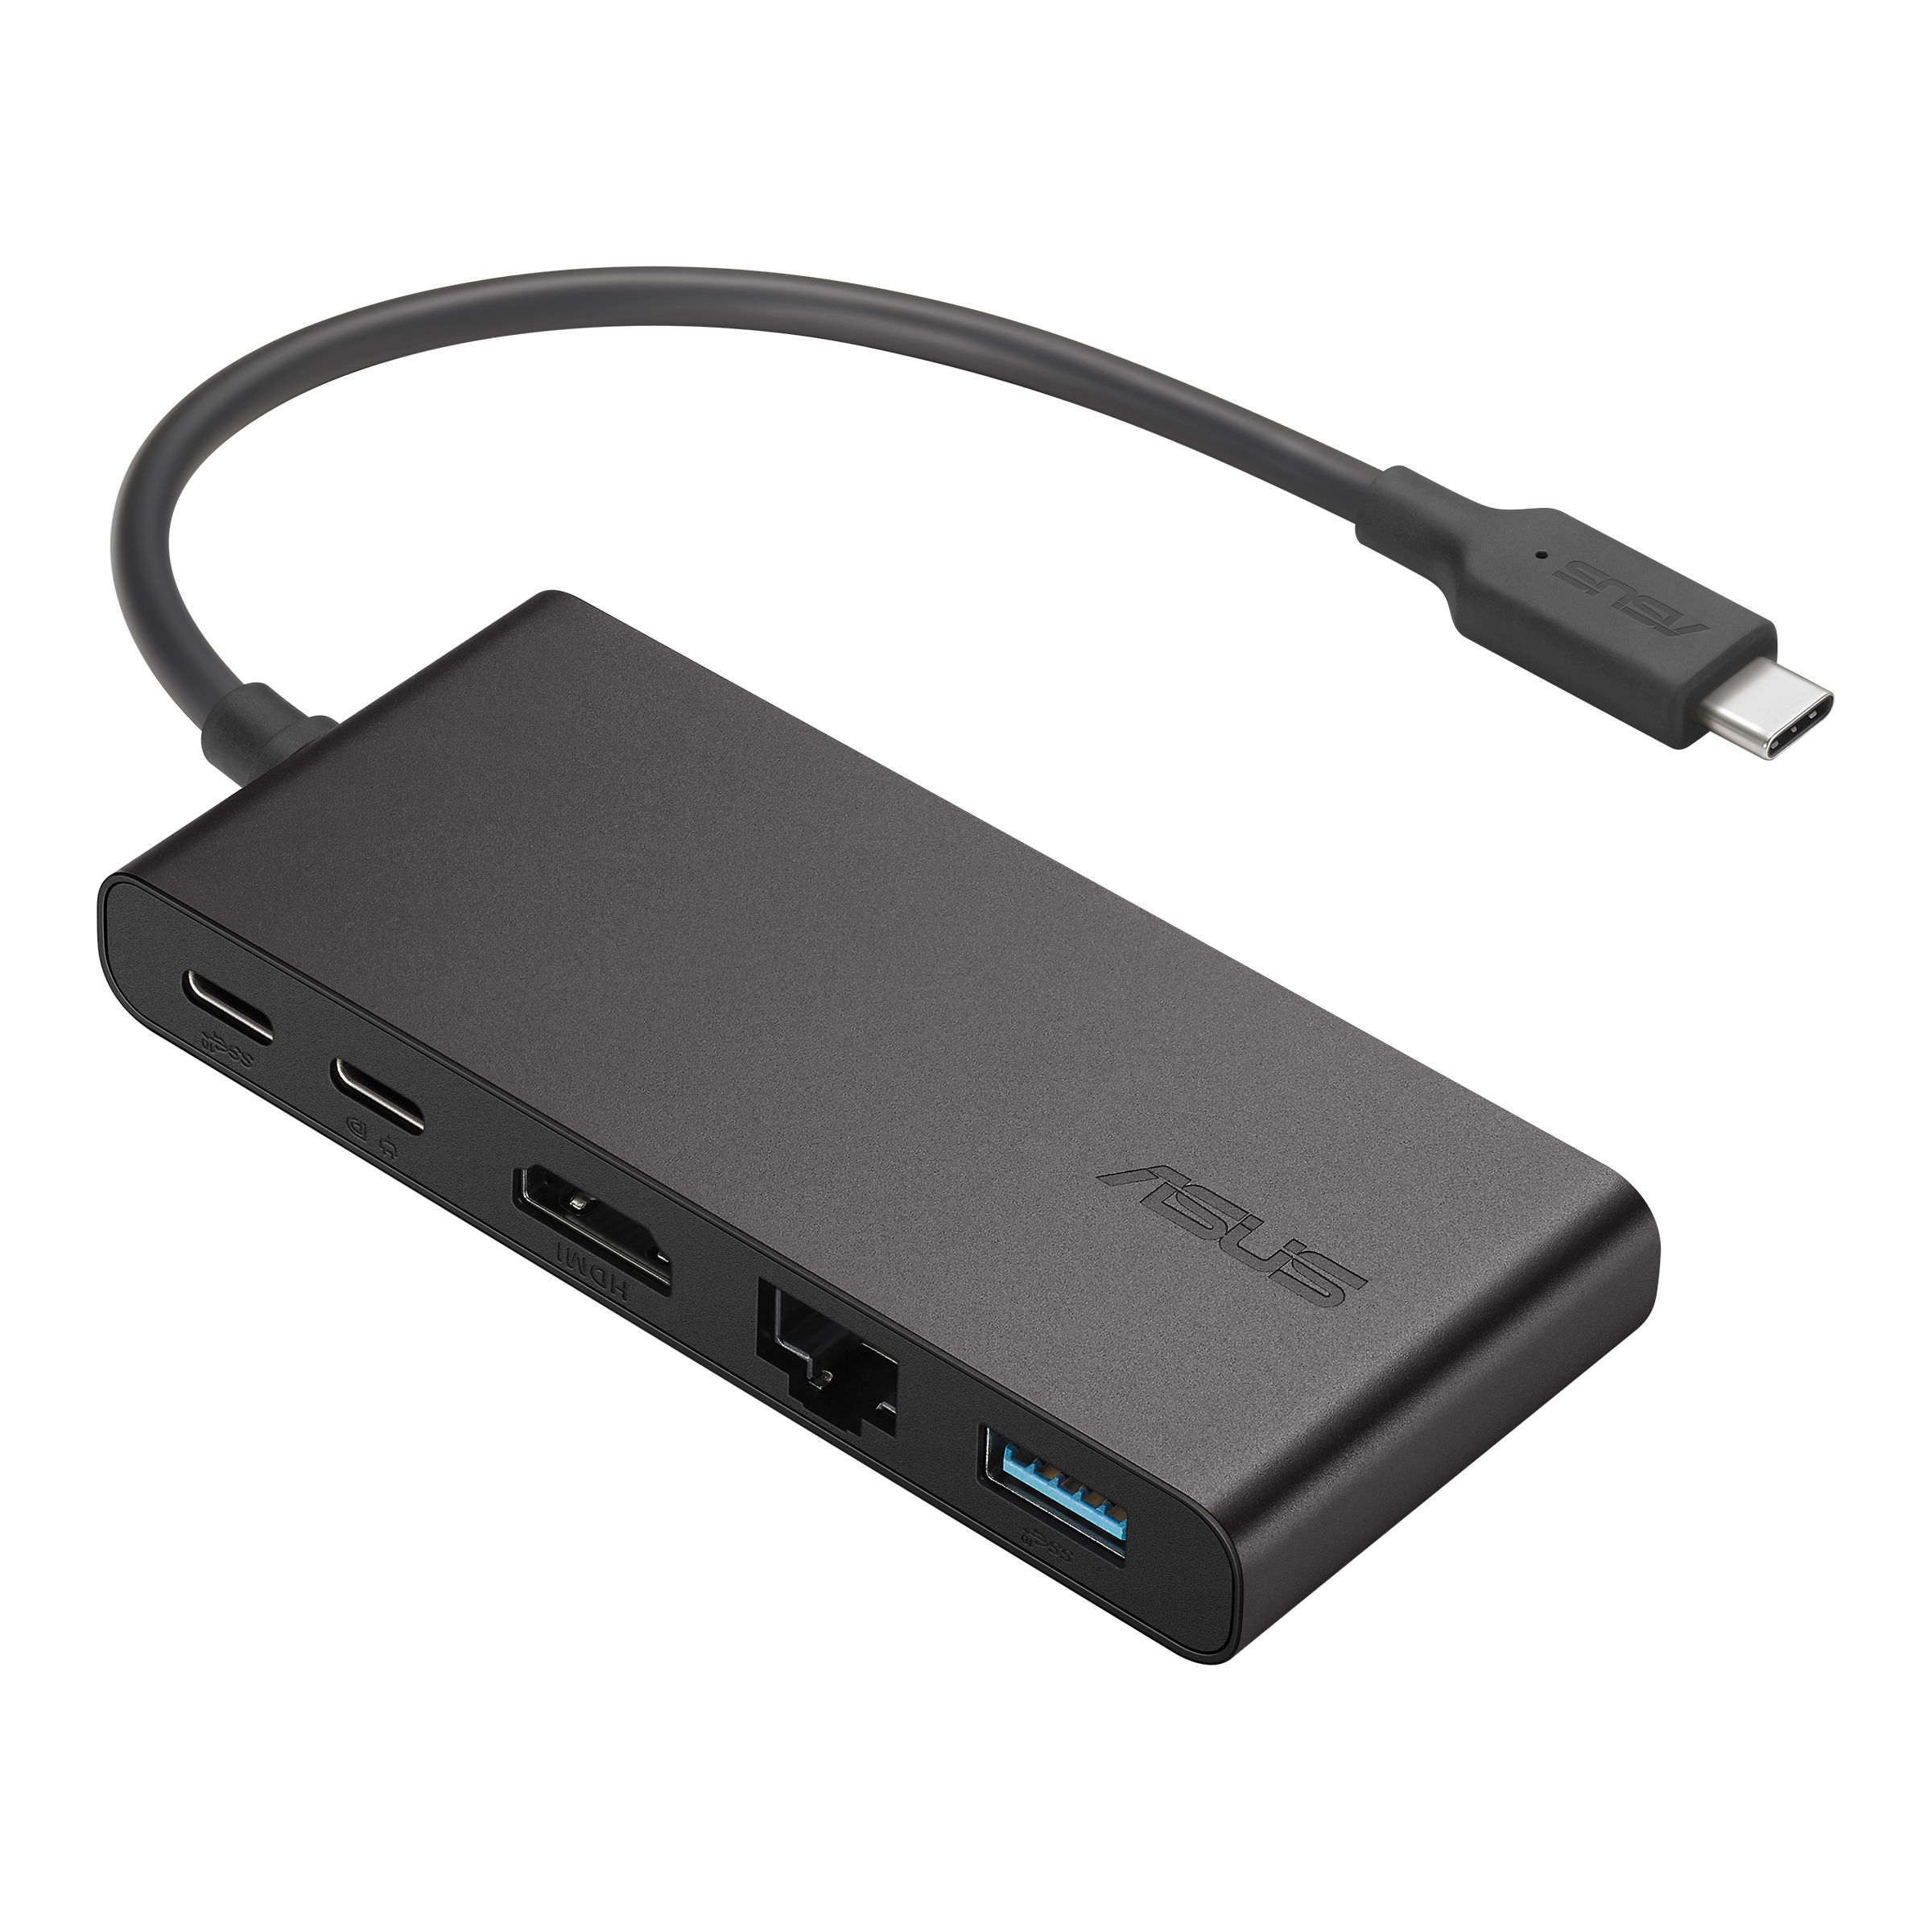 ASUS Dual 4K USB-C Dock｜Docks Dongles and Cable｜ASUS Global